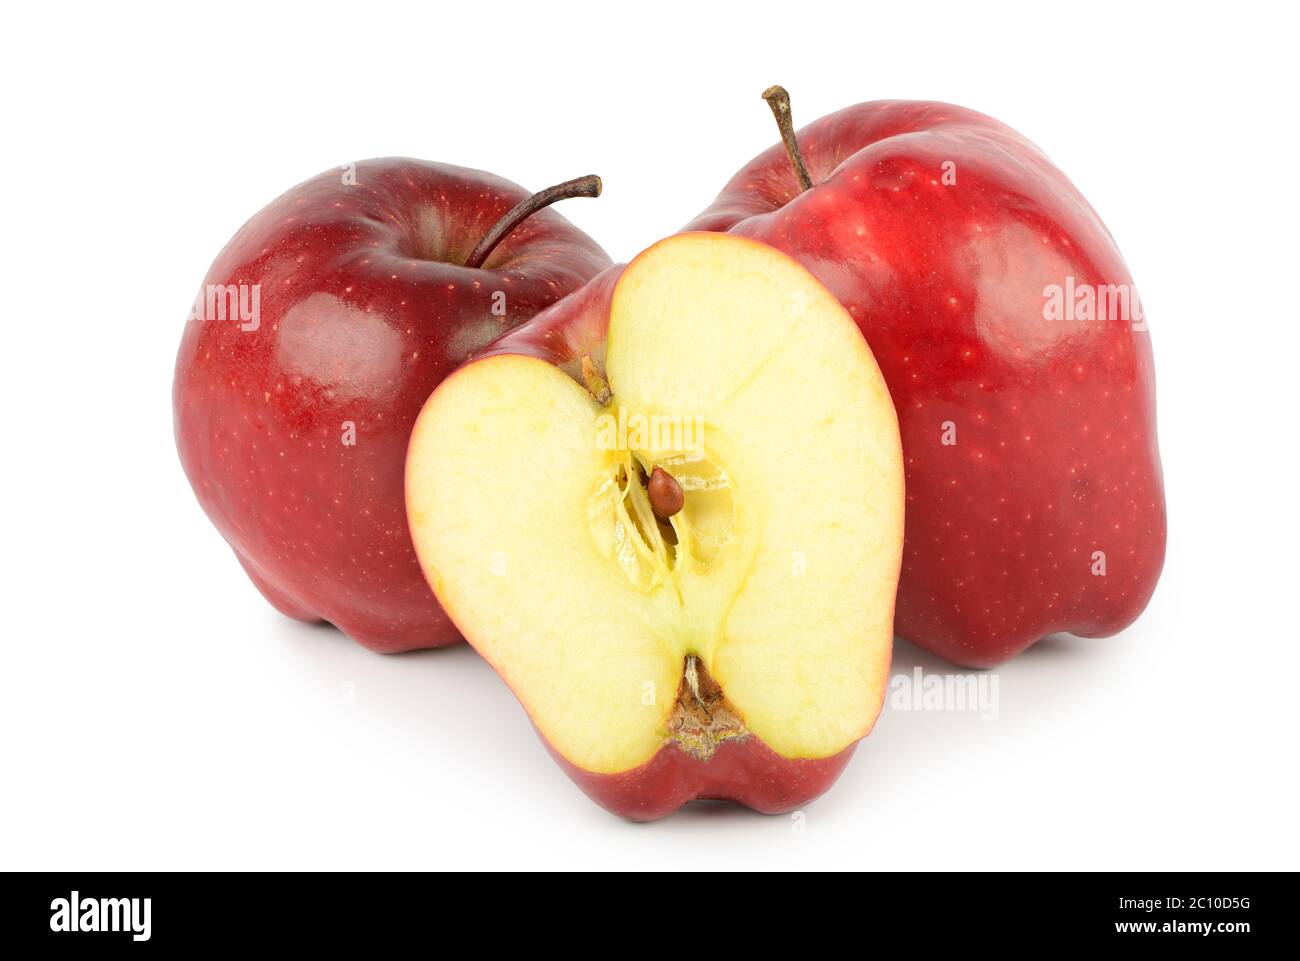 Red apples and slices isolated on white background. Stock Photo